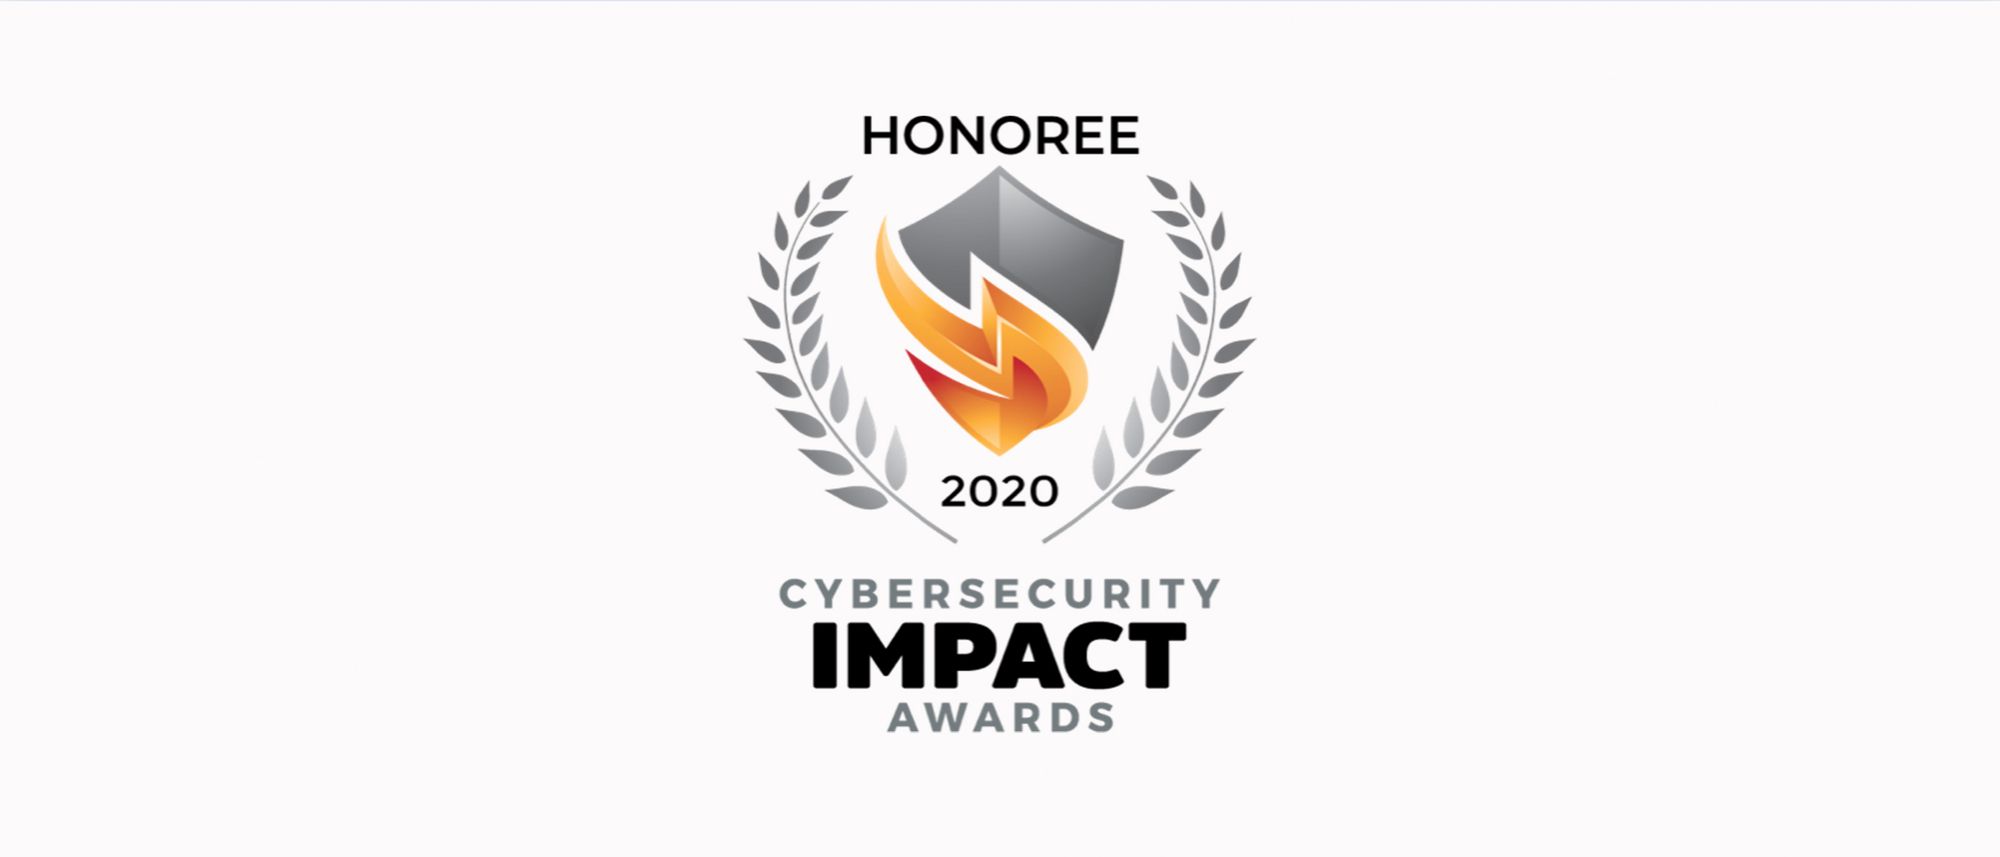 Jason Crabtree Honored with 2020 Cybersecurity Impact Award